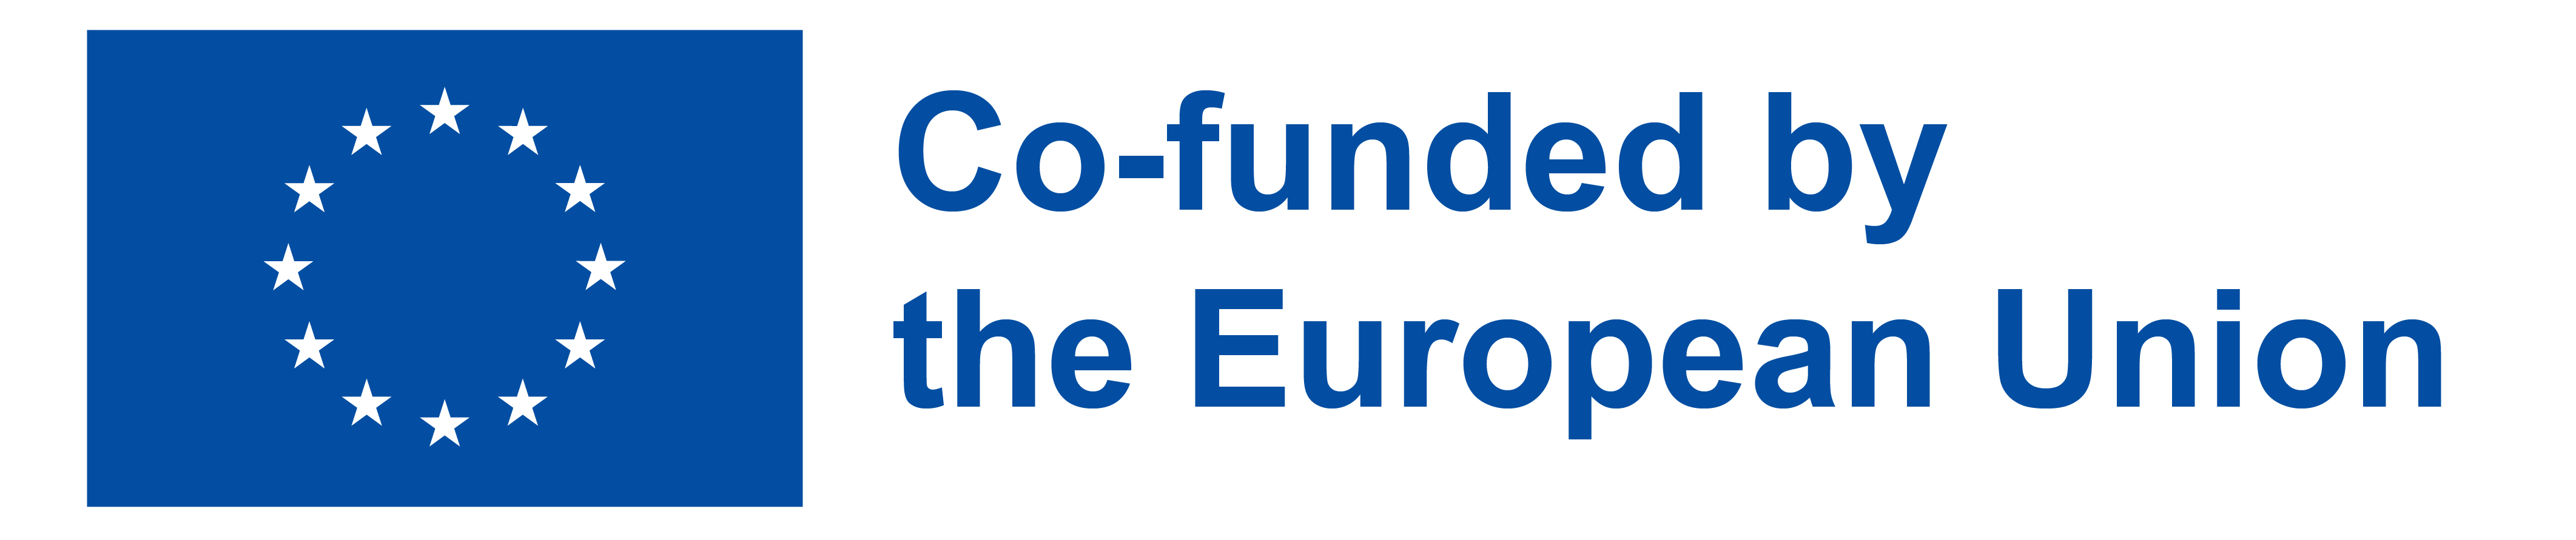 EU logo and co-funding statement